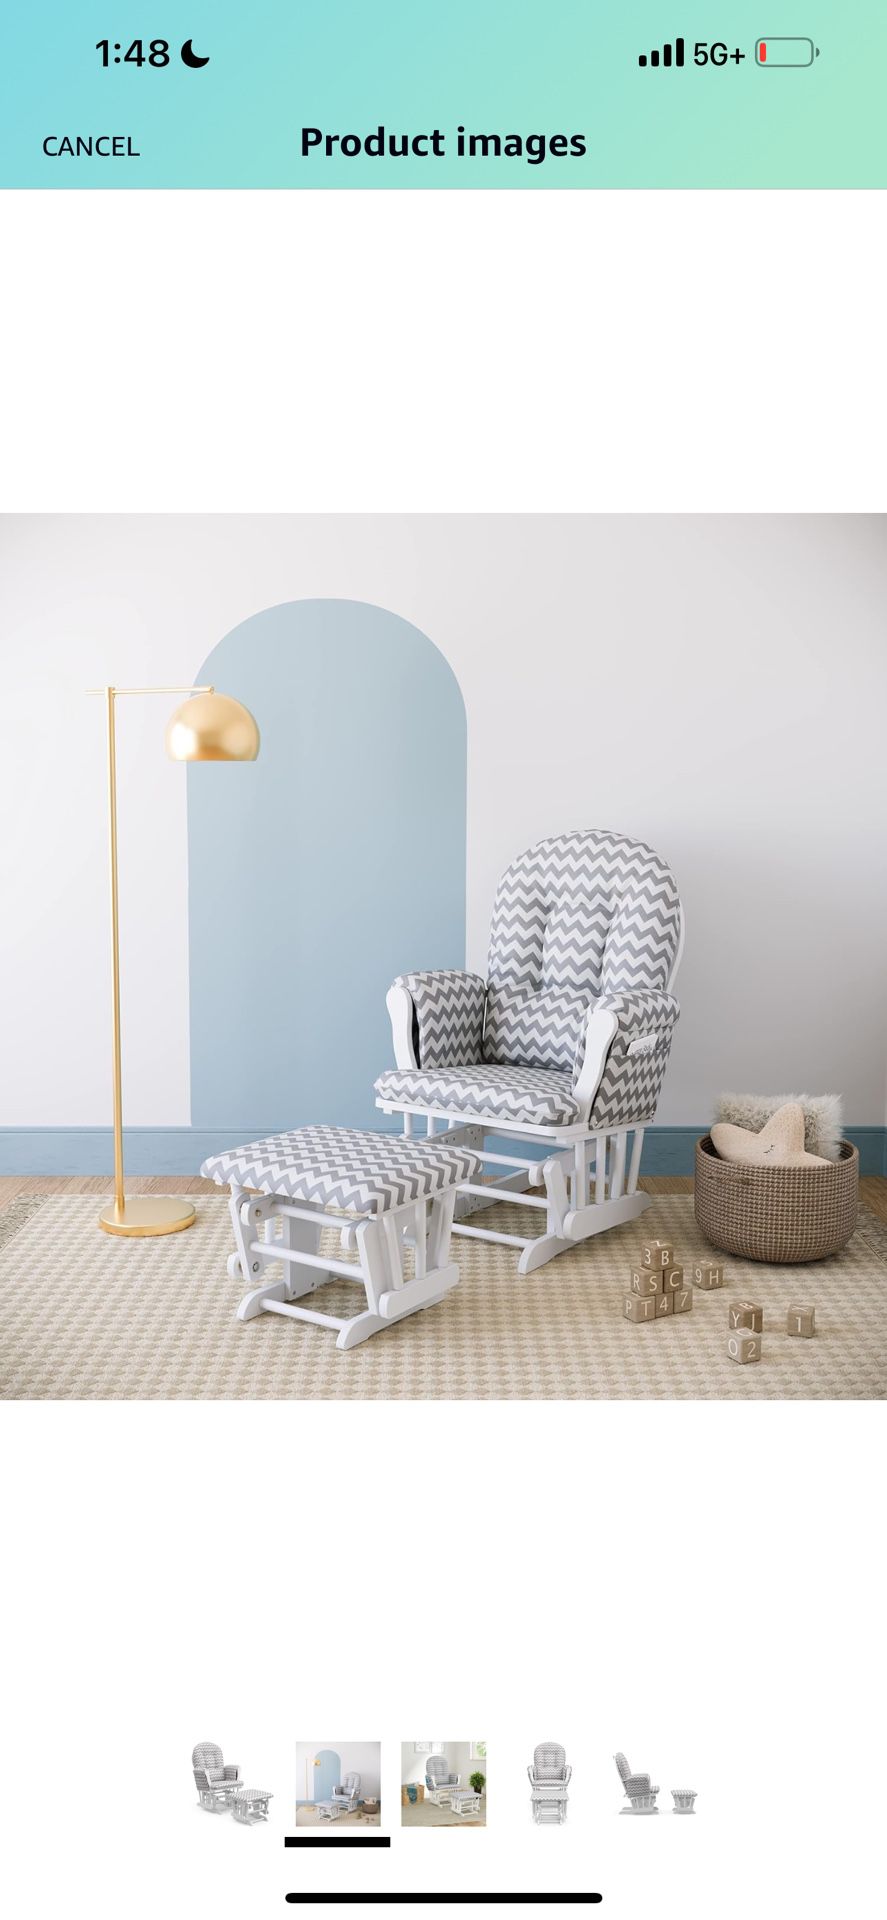 Rocking chair With Ottoman, Kids Room 